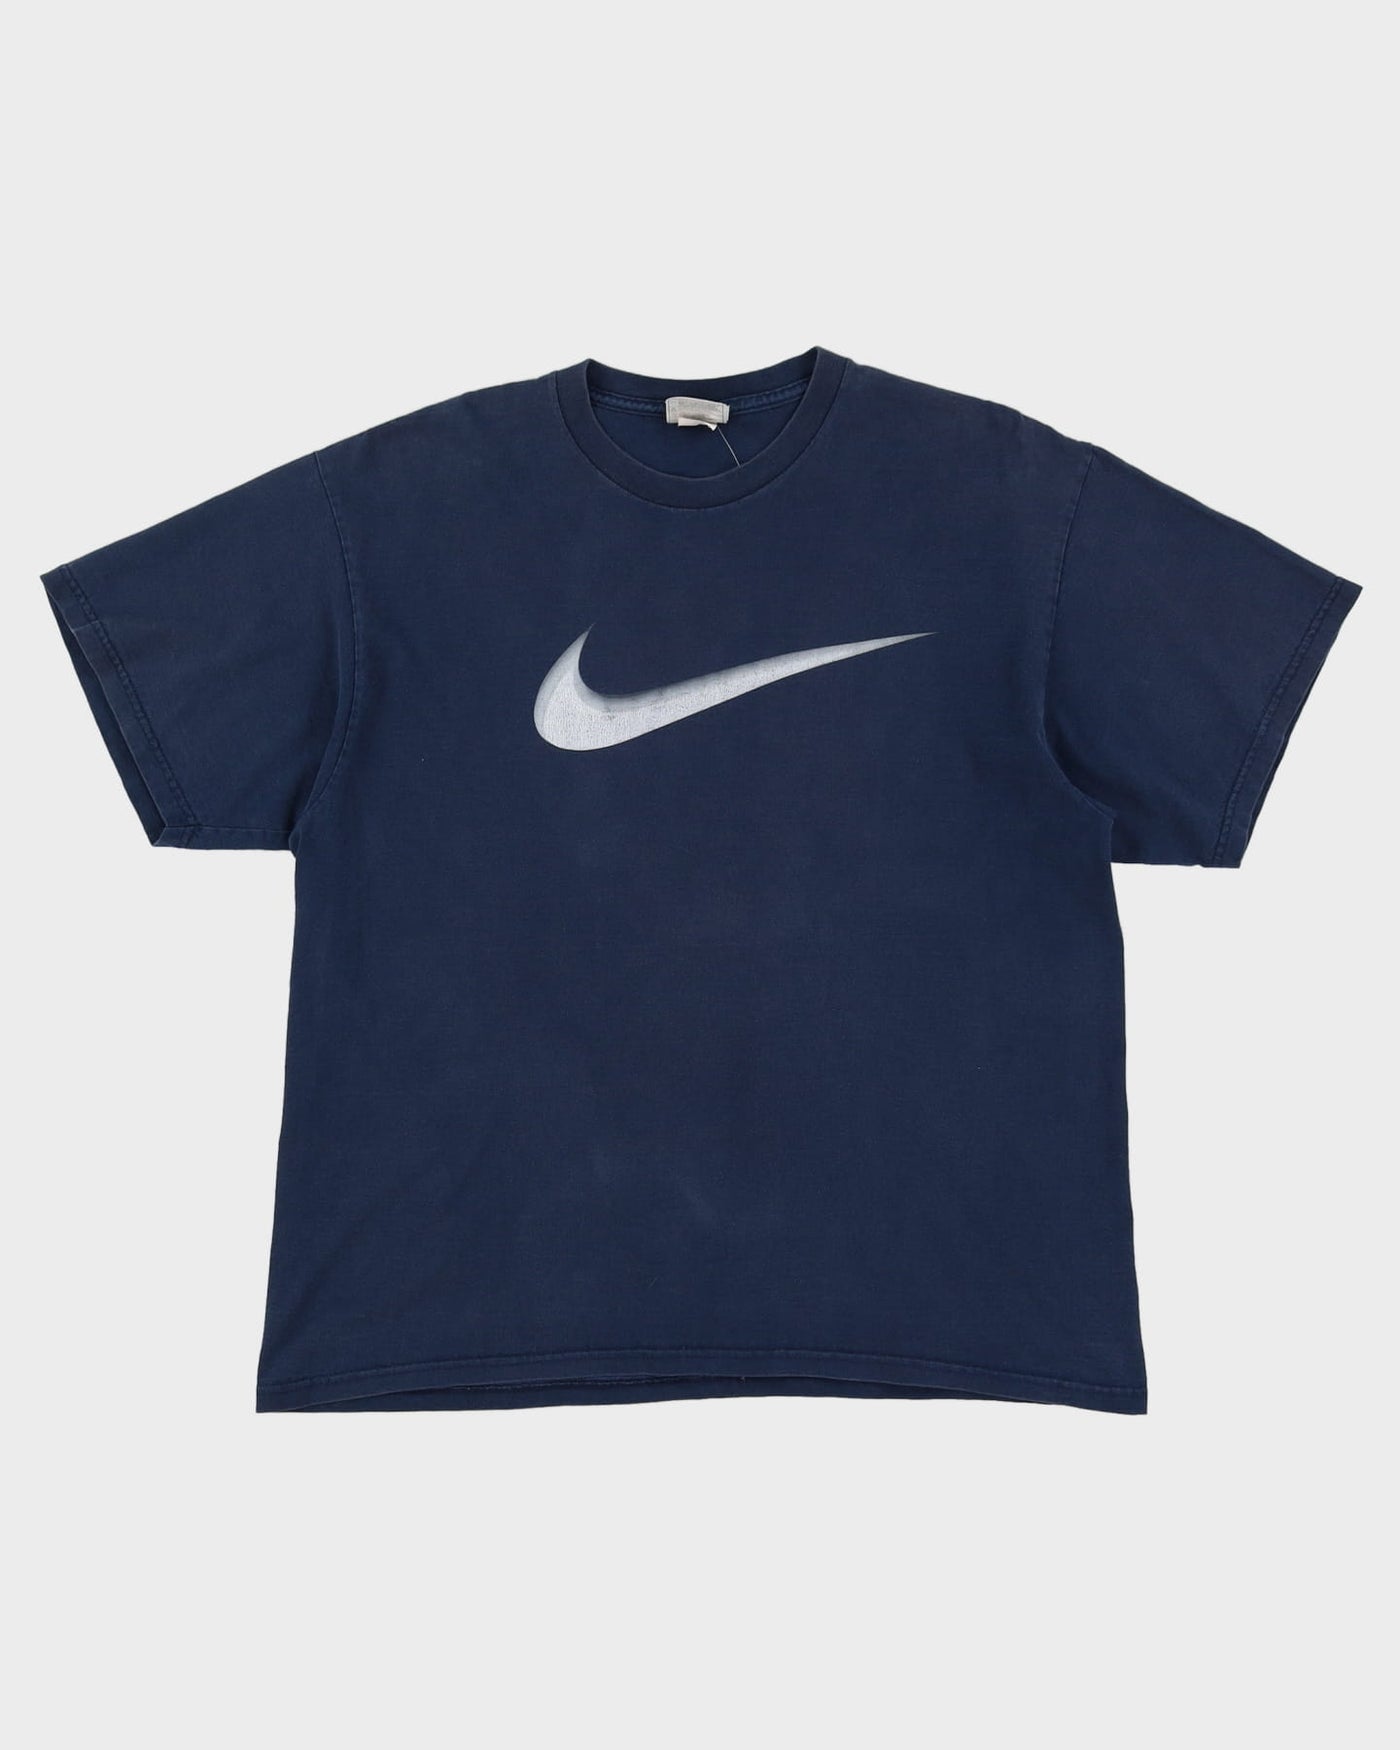 00s Nike Navy Graphic T-Shirt - L